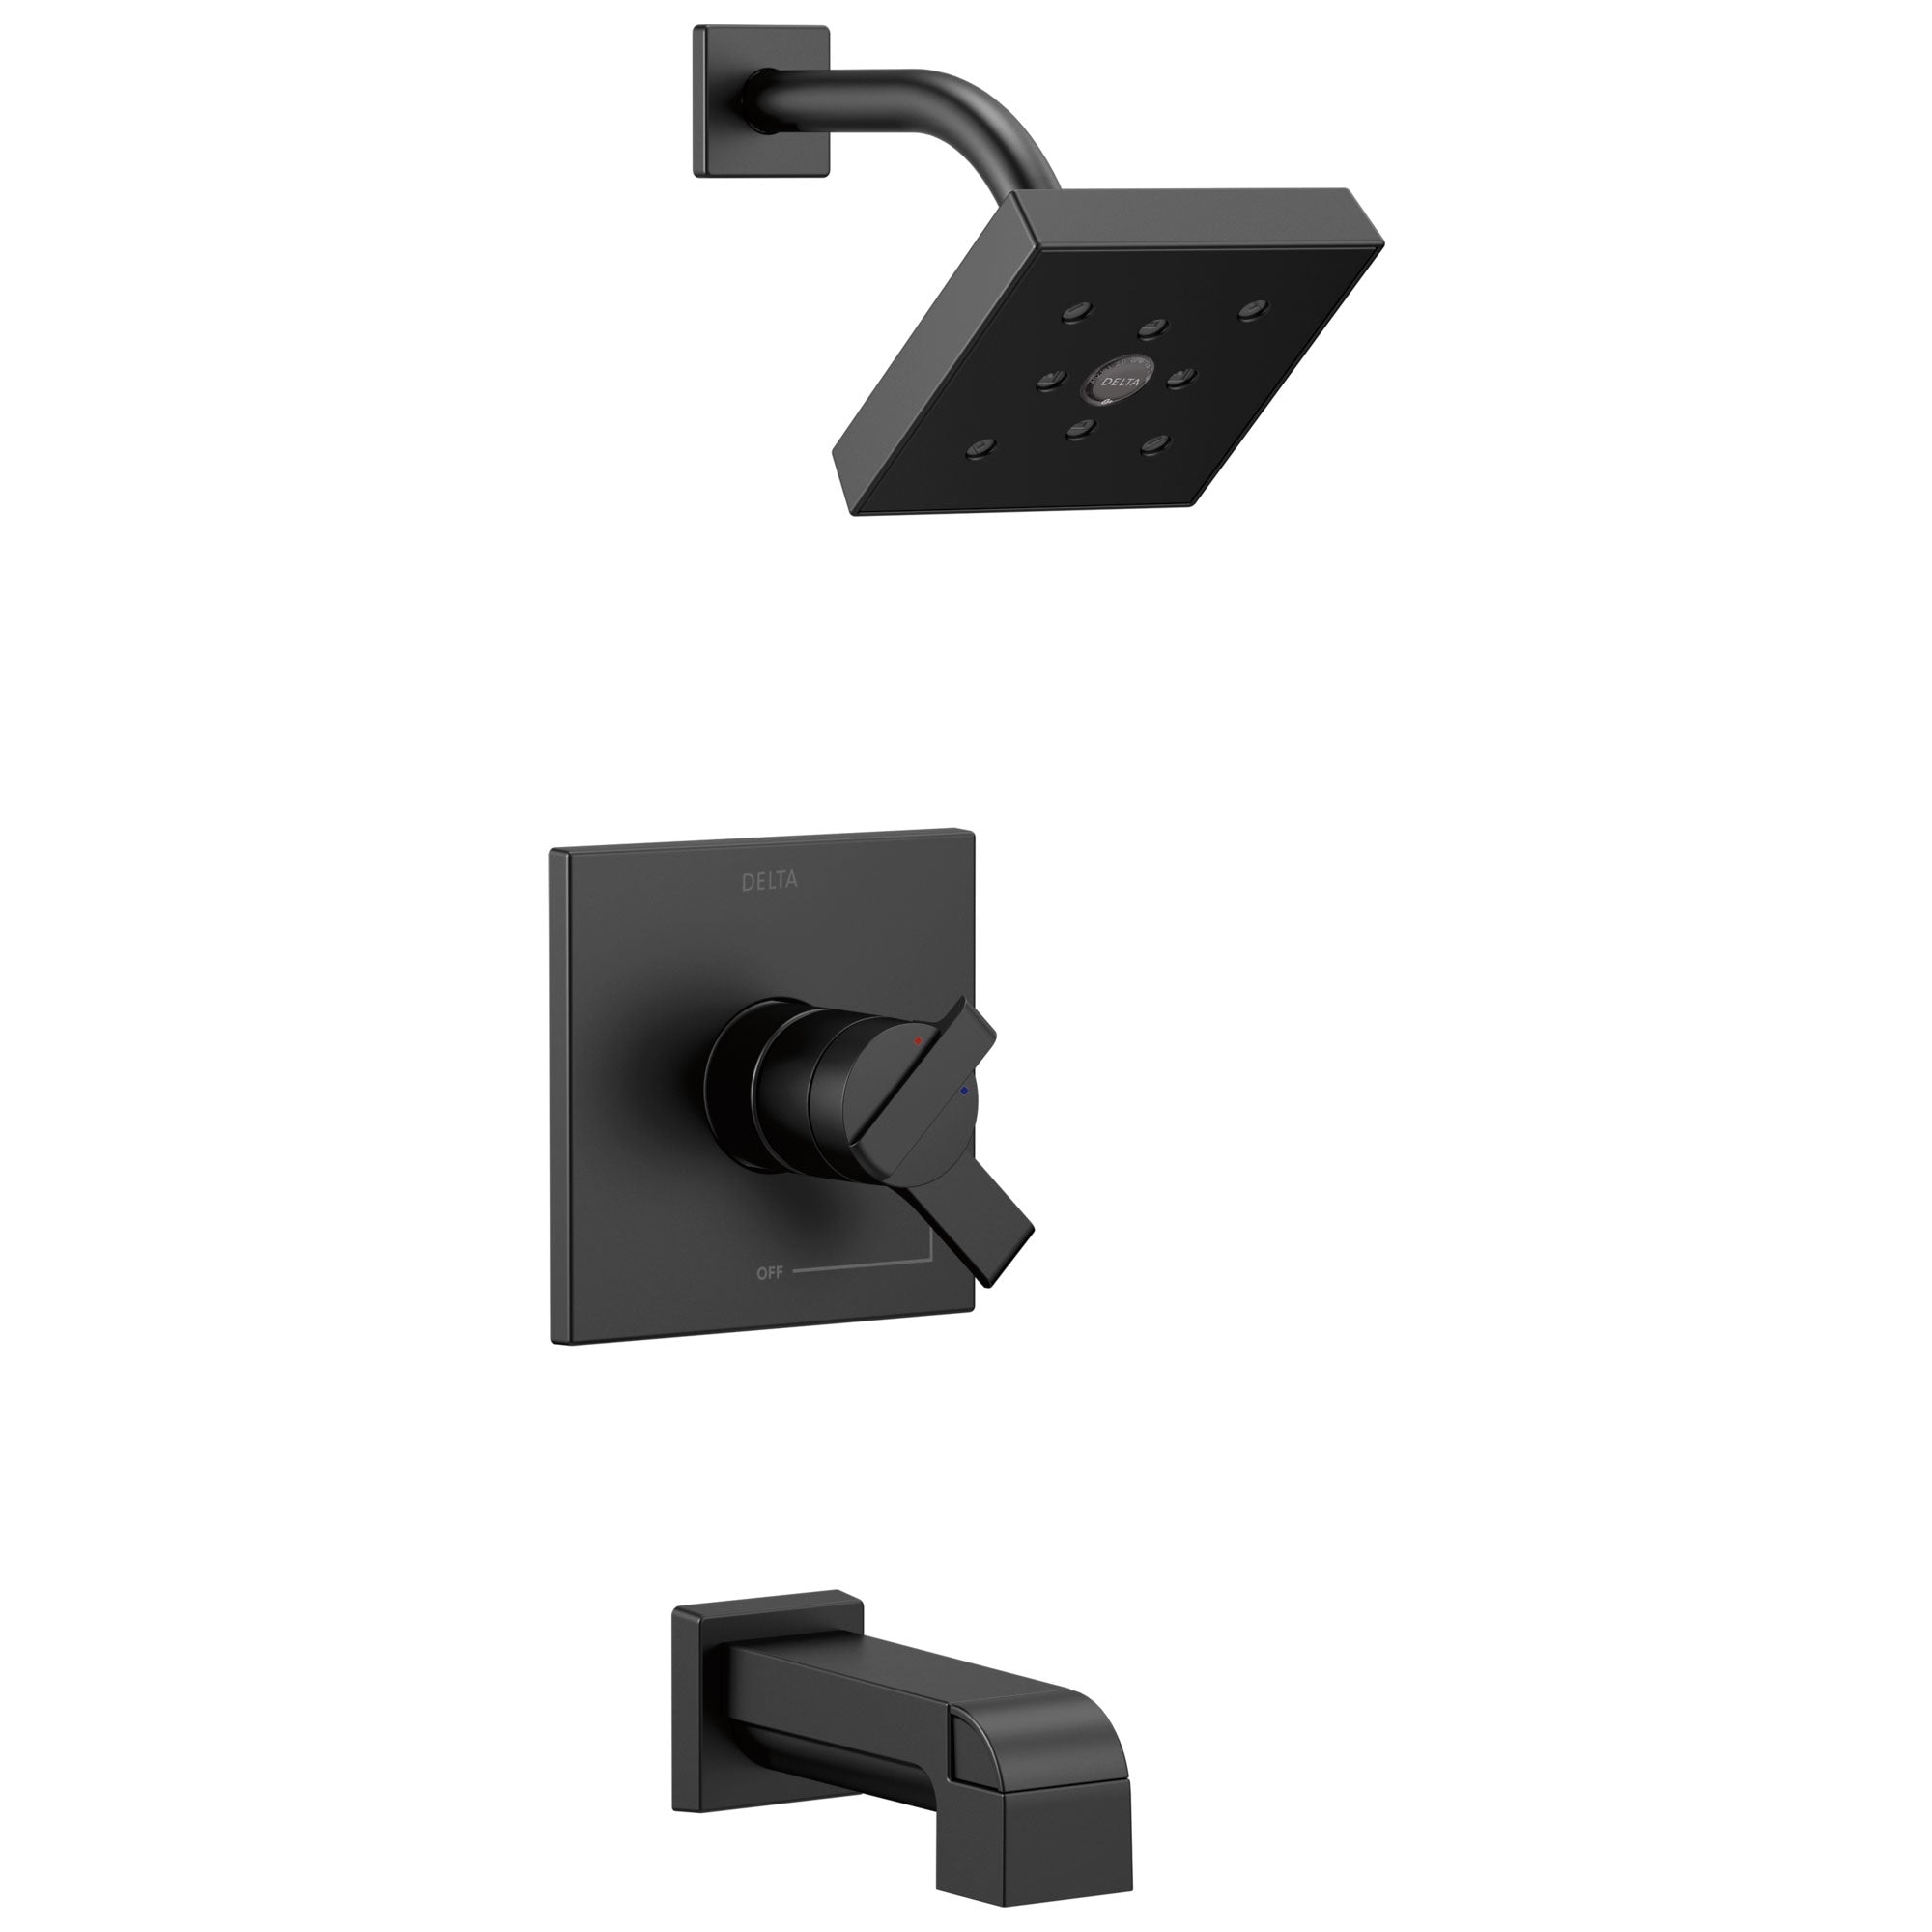 Delta Ara Collection Matte Black Finish Modern Temperature and Water Pressure Dual Control Tub & Shower Faucet Combo Includes Rough Valve with Stops D2296V